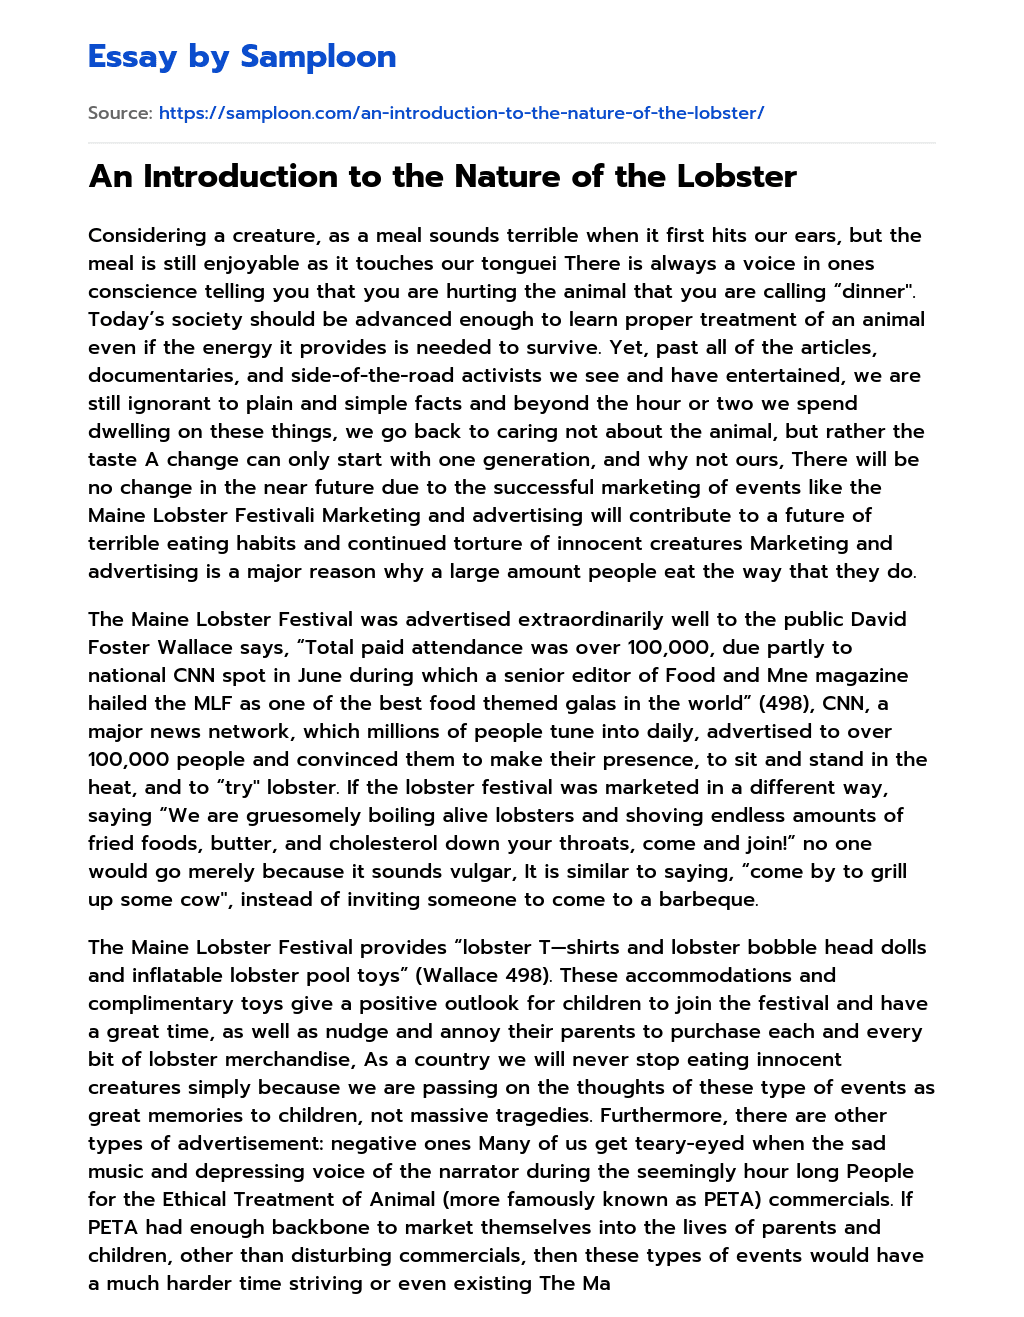 An Introduction to the Nature of the Lobster essay